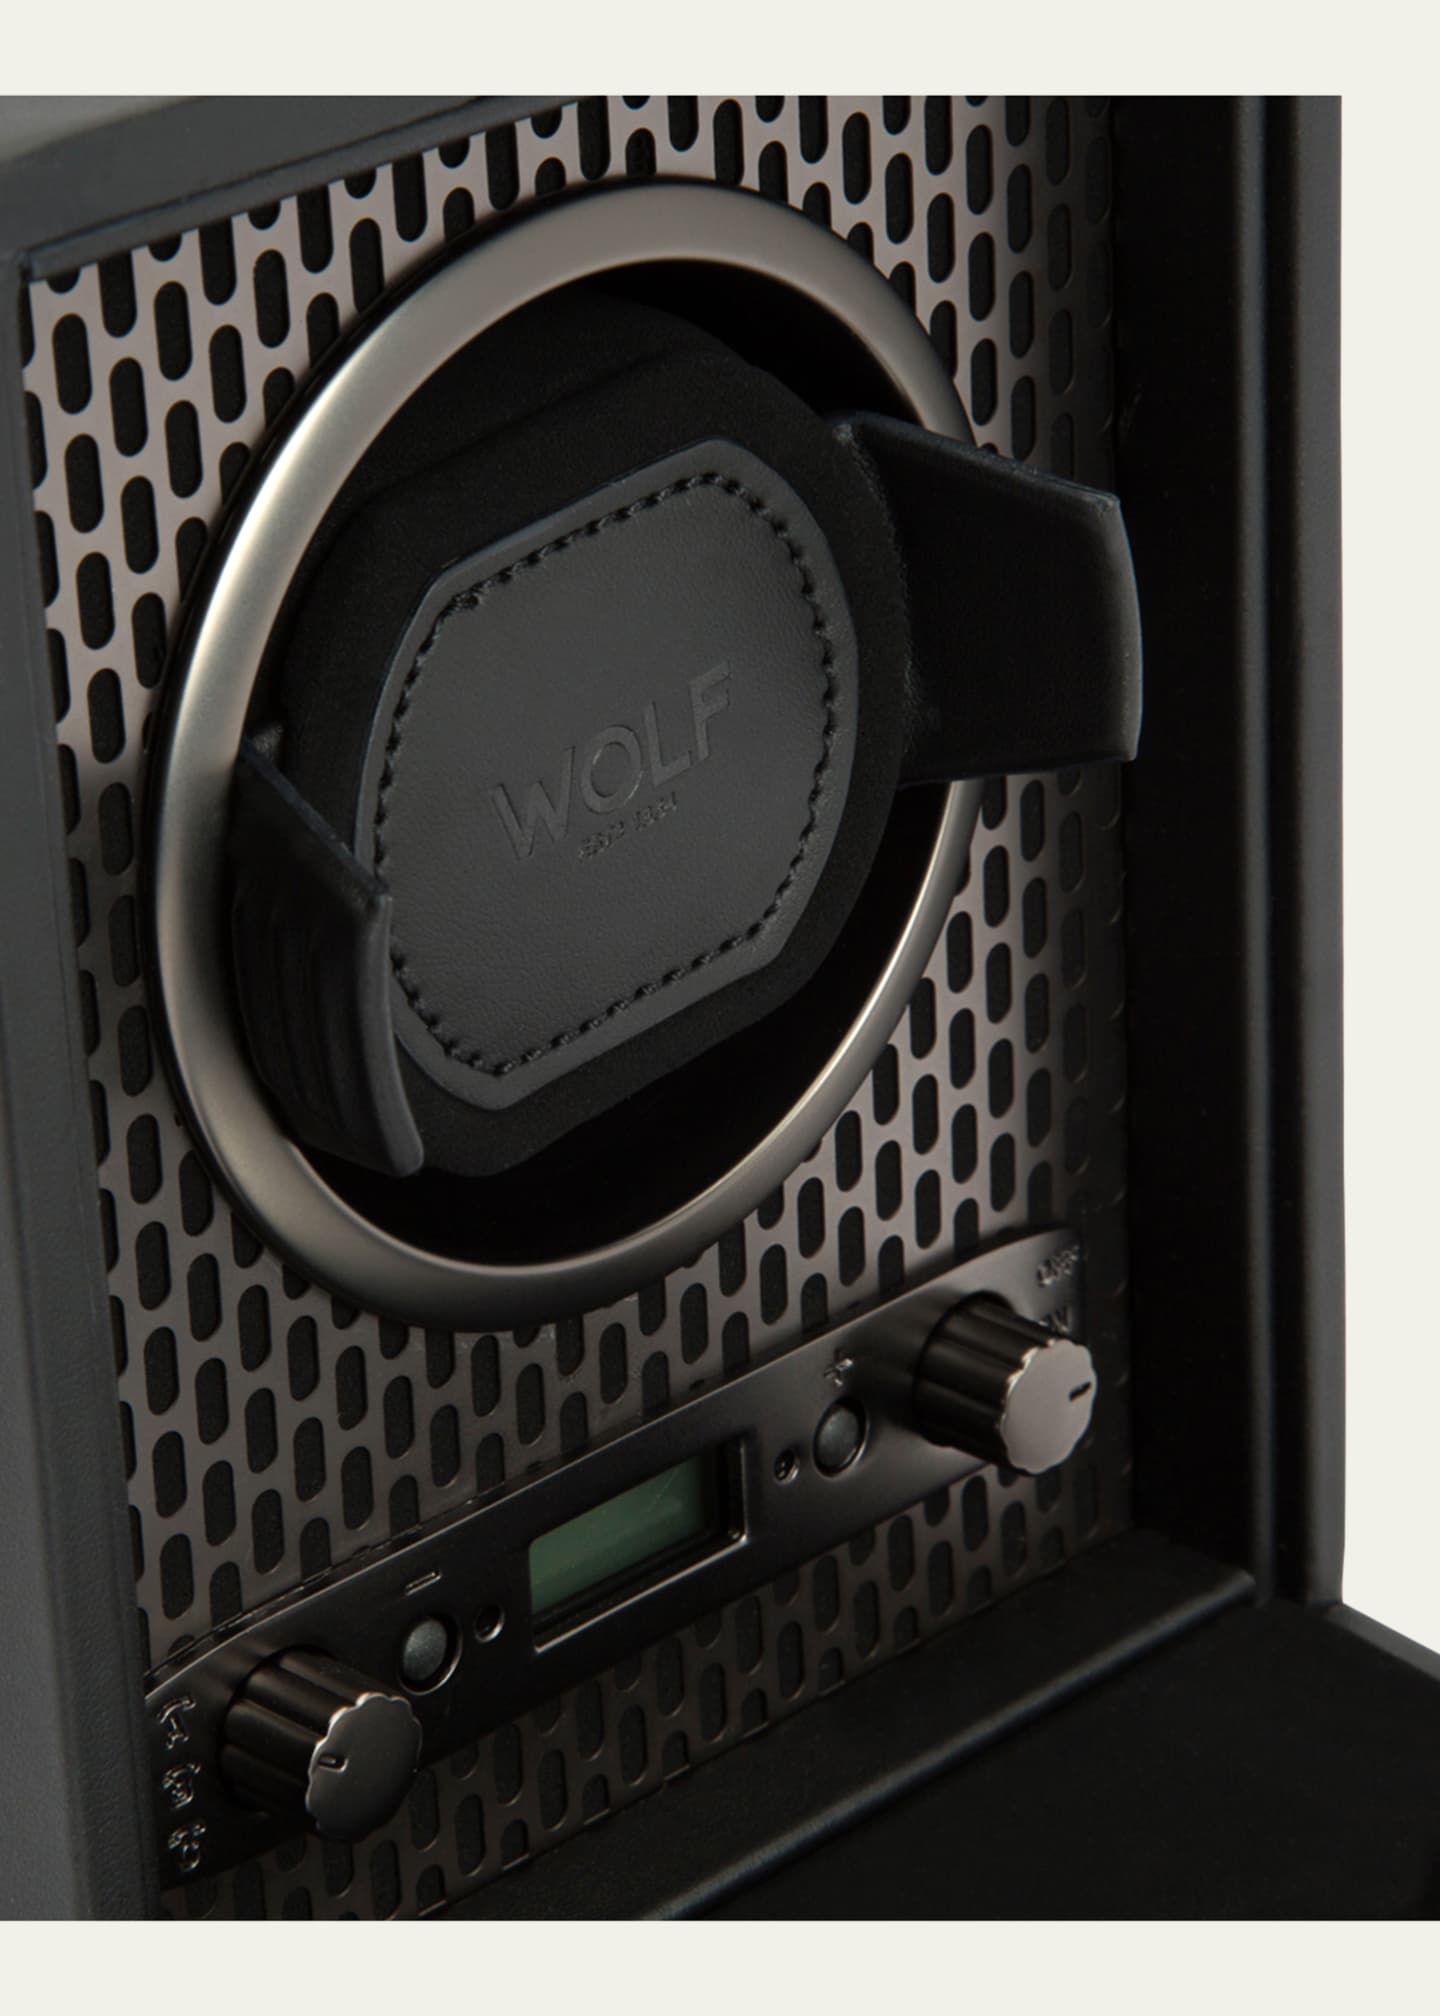 WOLF Axis Single Watch Winder Image 2 of 4